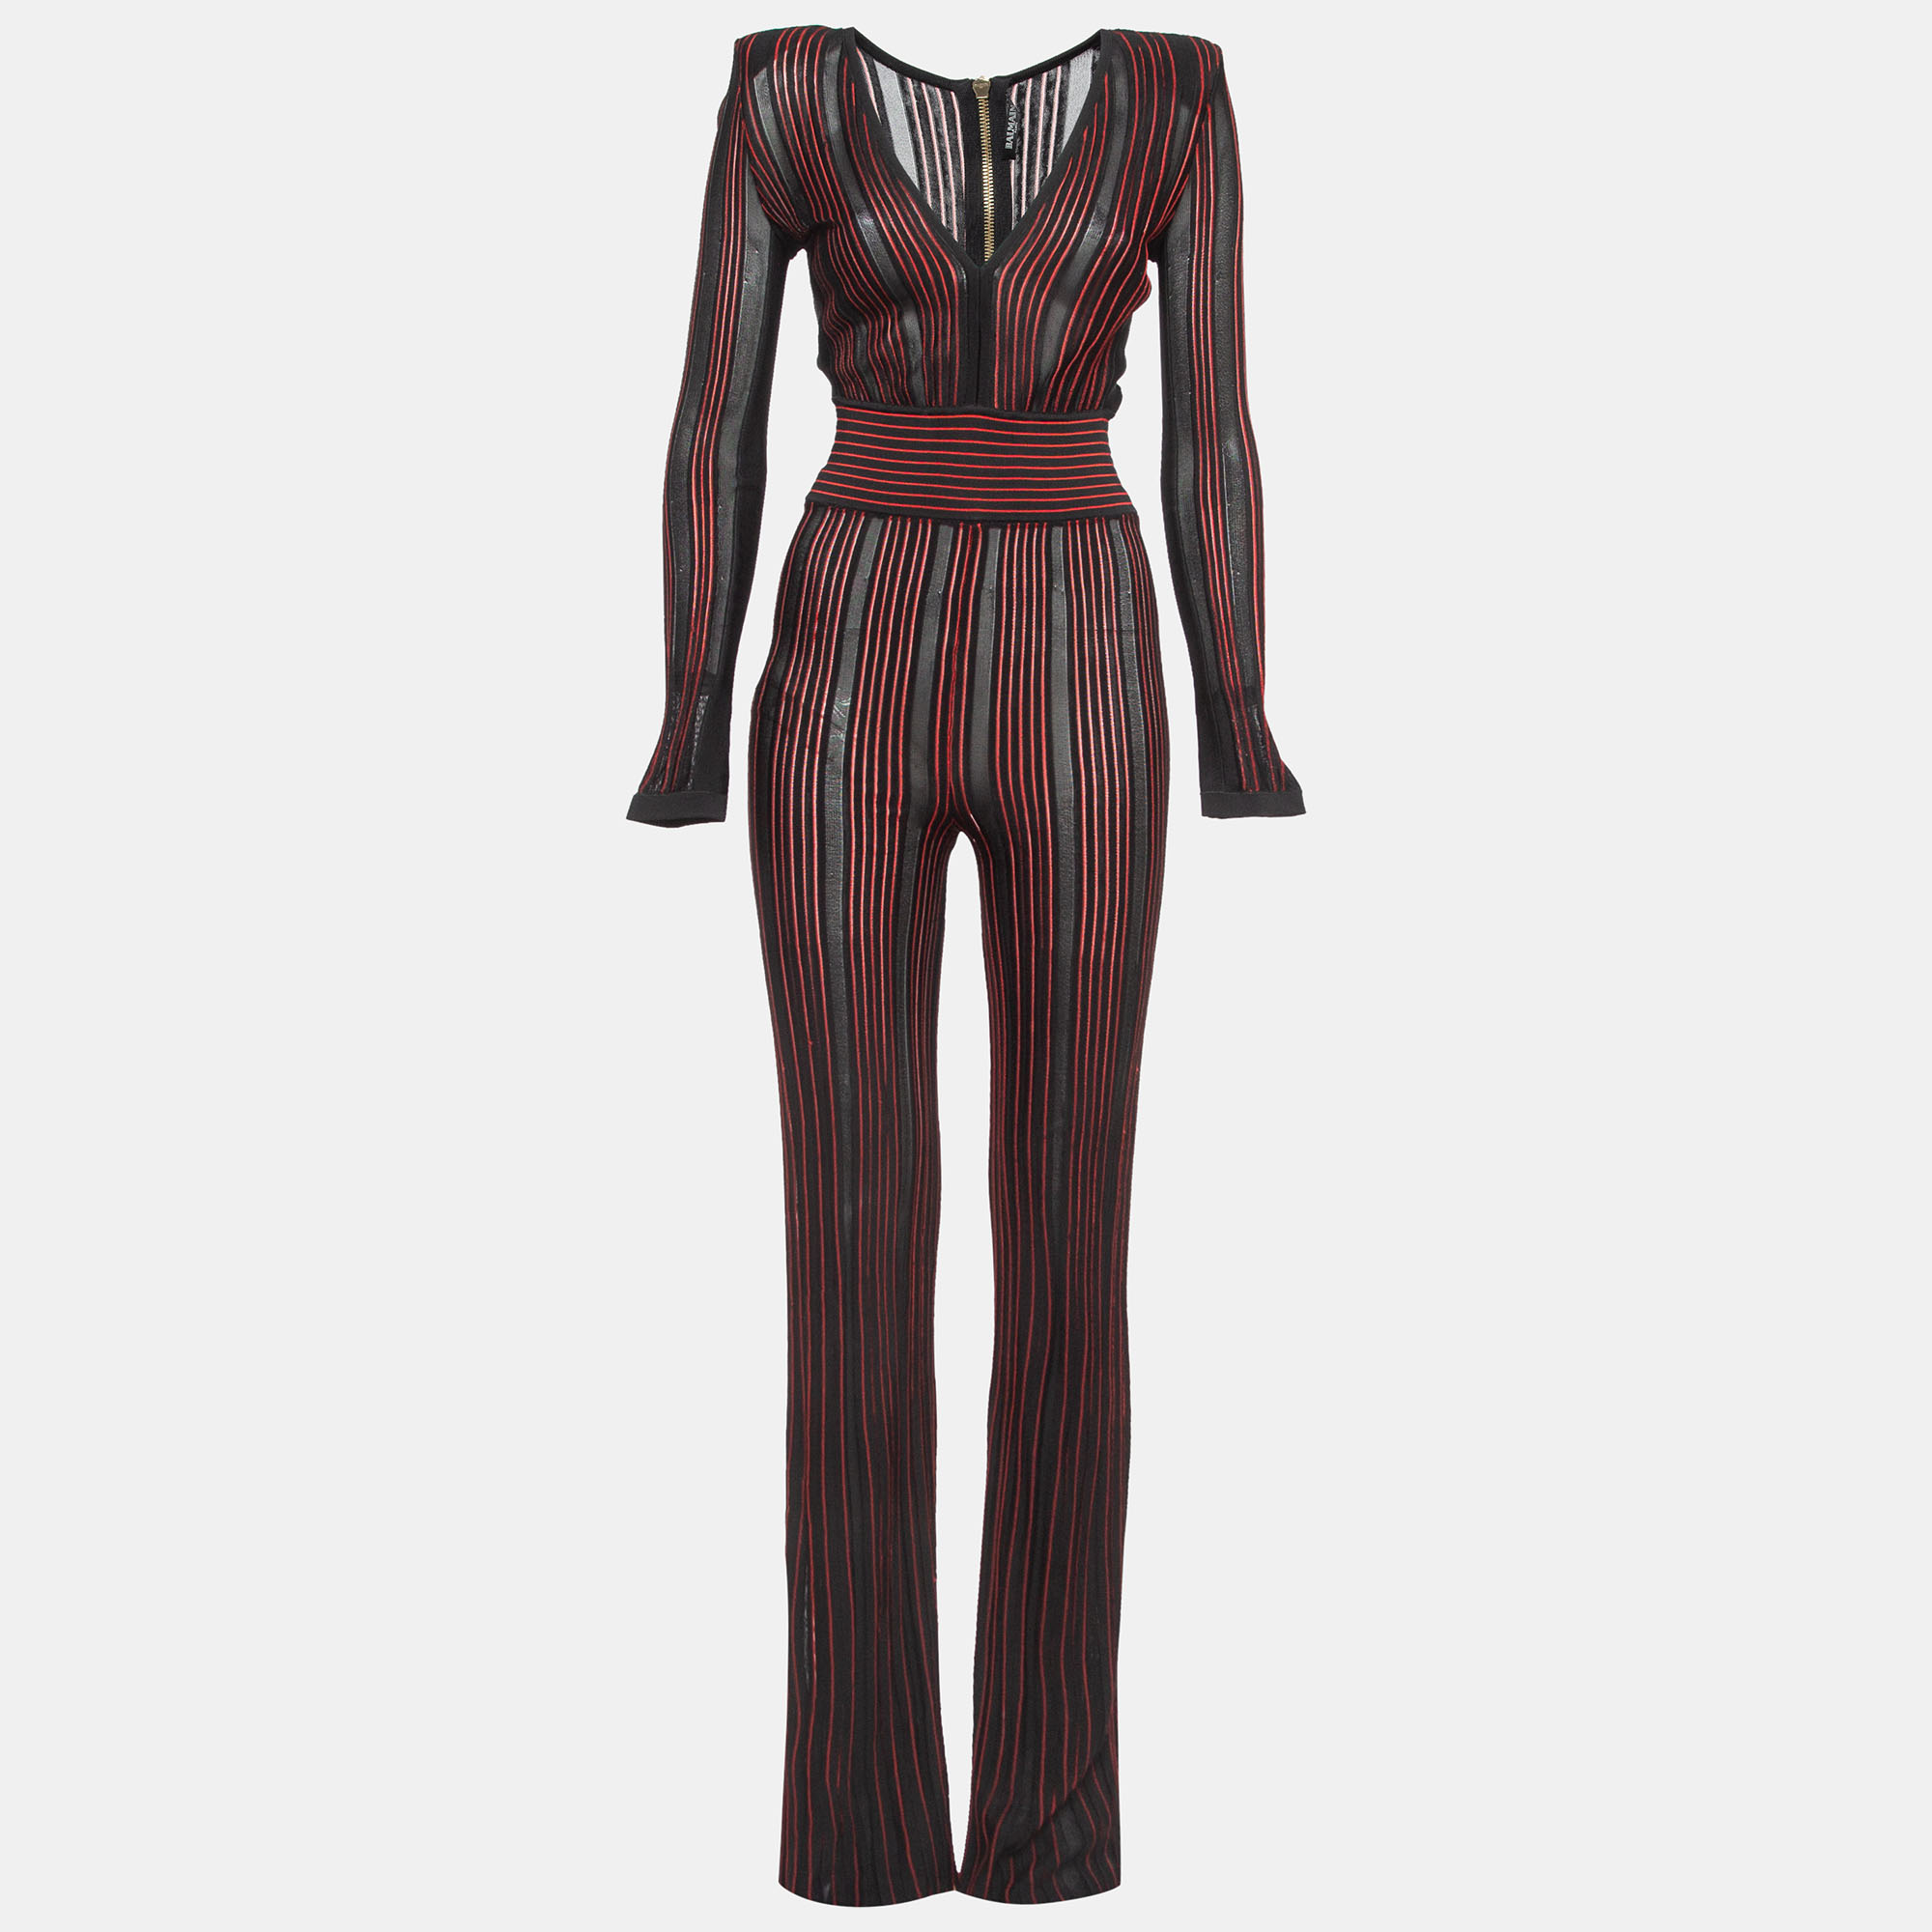 Balmain black/red striped stretch sheer jumpsuit s